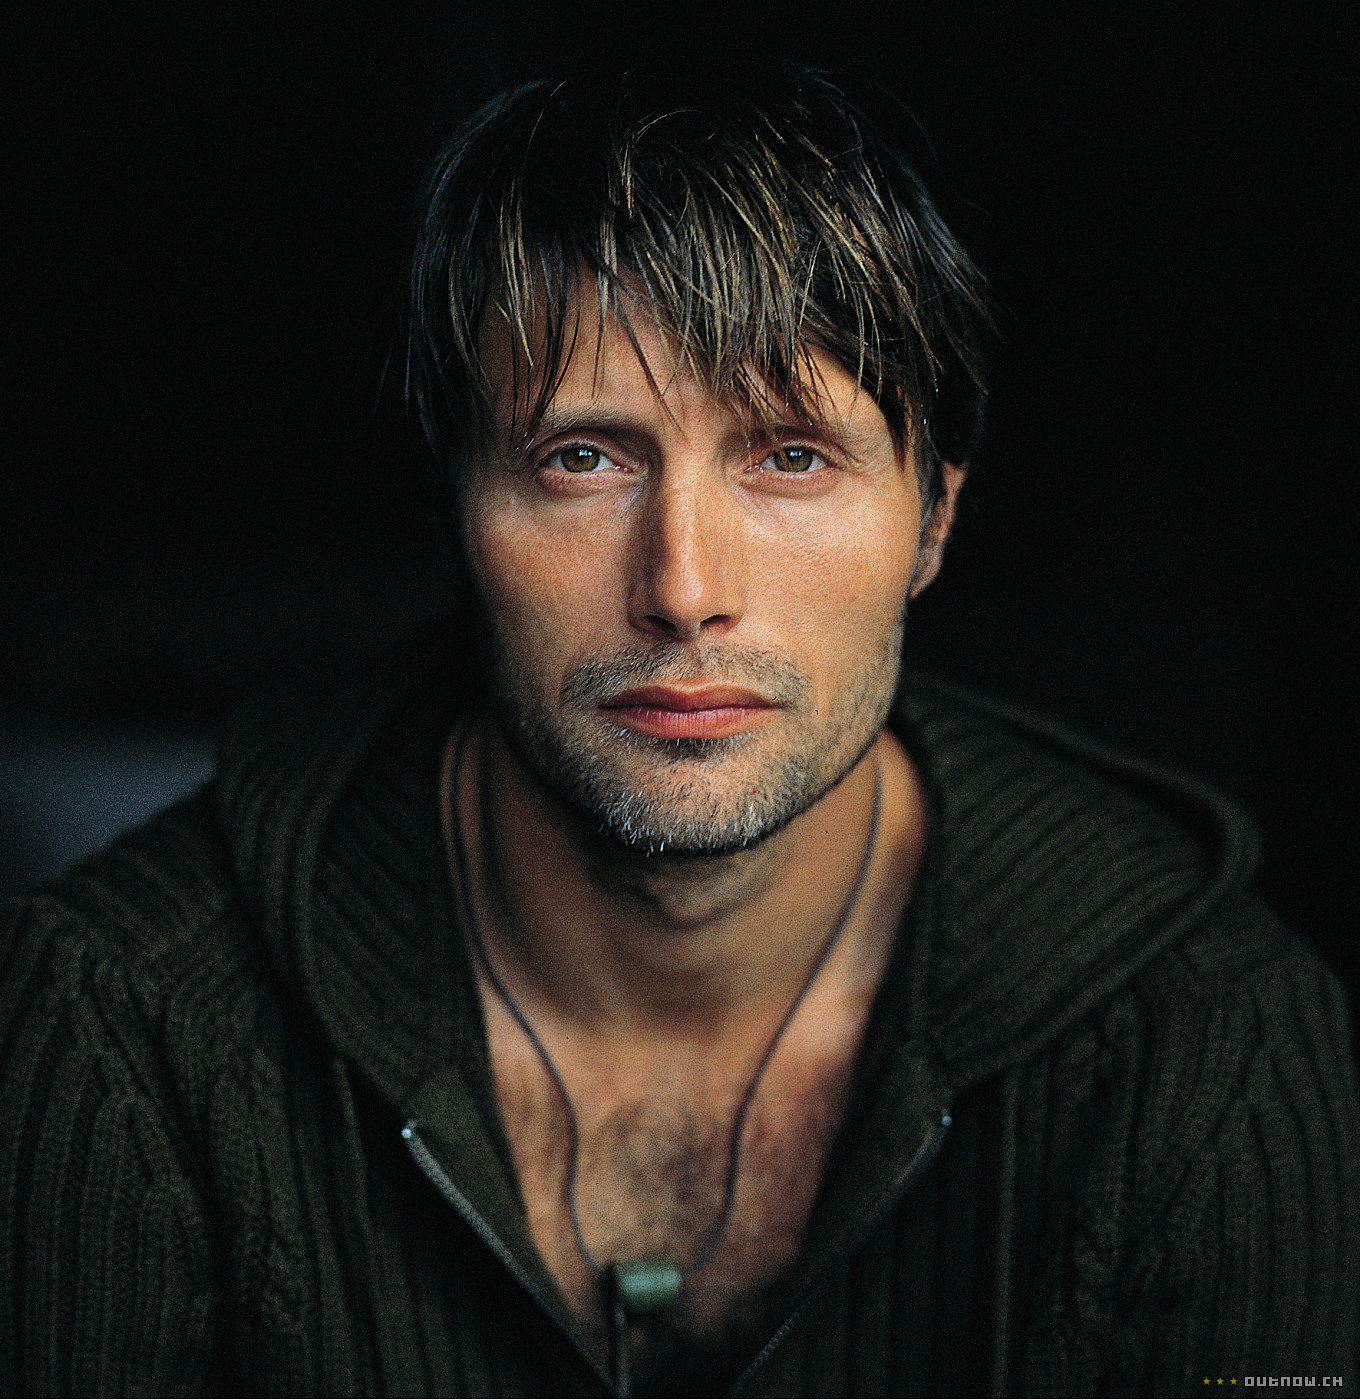 Mads Mikkelsen photo 8 of 87 pics, wallpaper - photo #297364 - ThePlace2